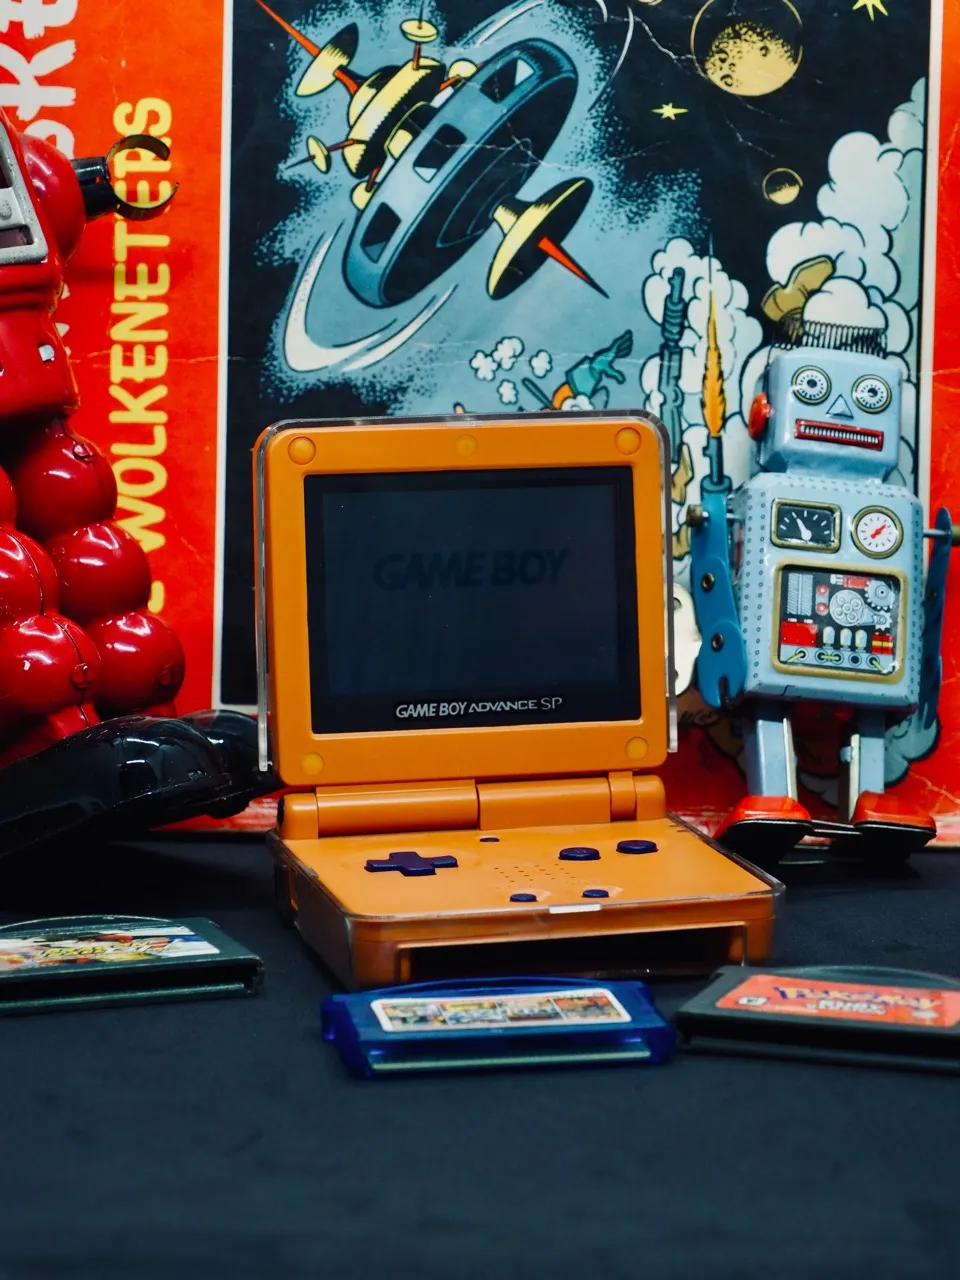 The Power of Nostalgia: Retro Gaming and Toy Licensing Revivals